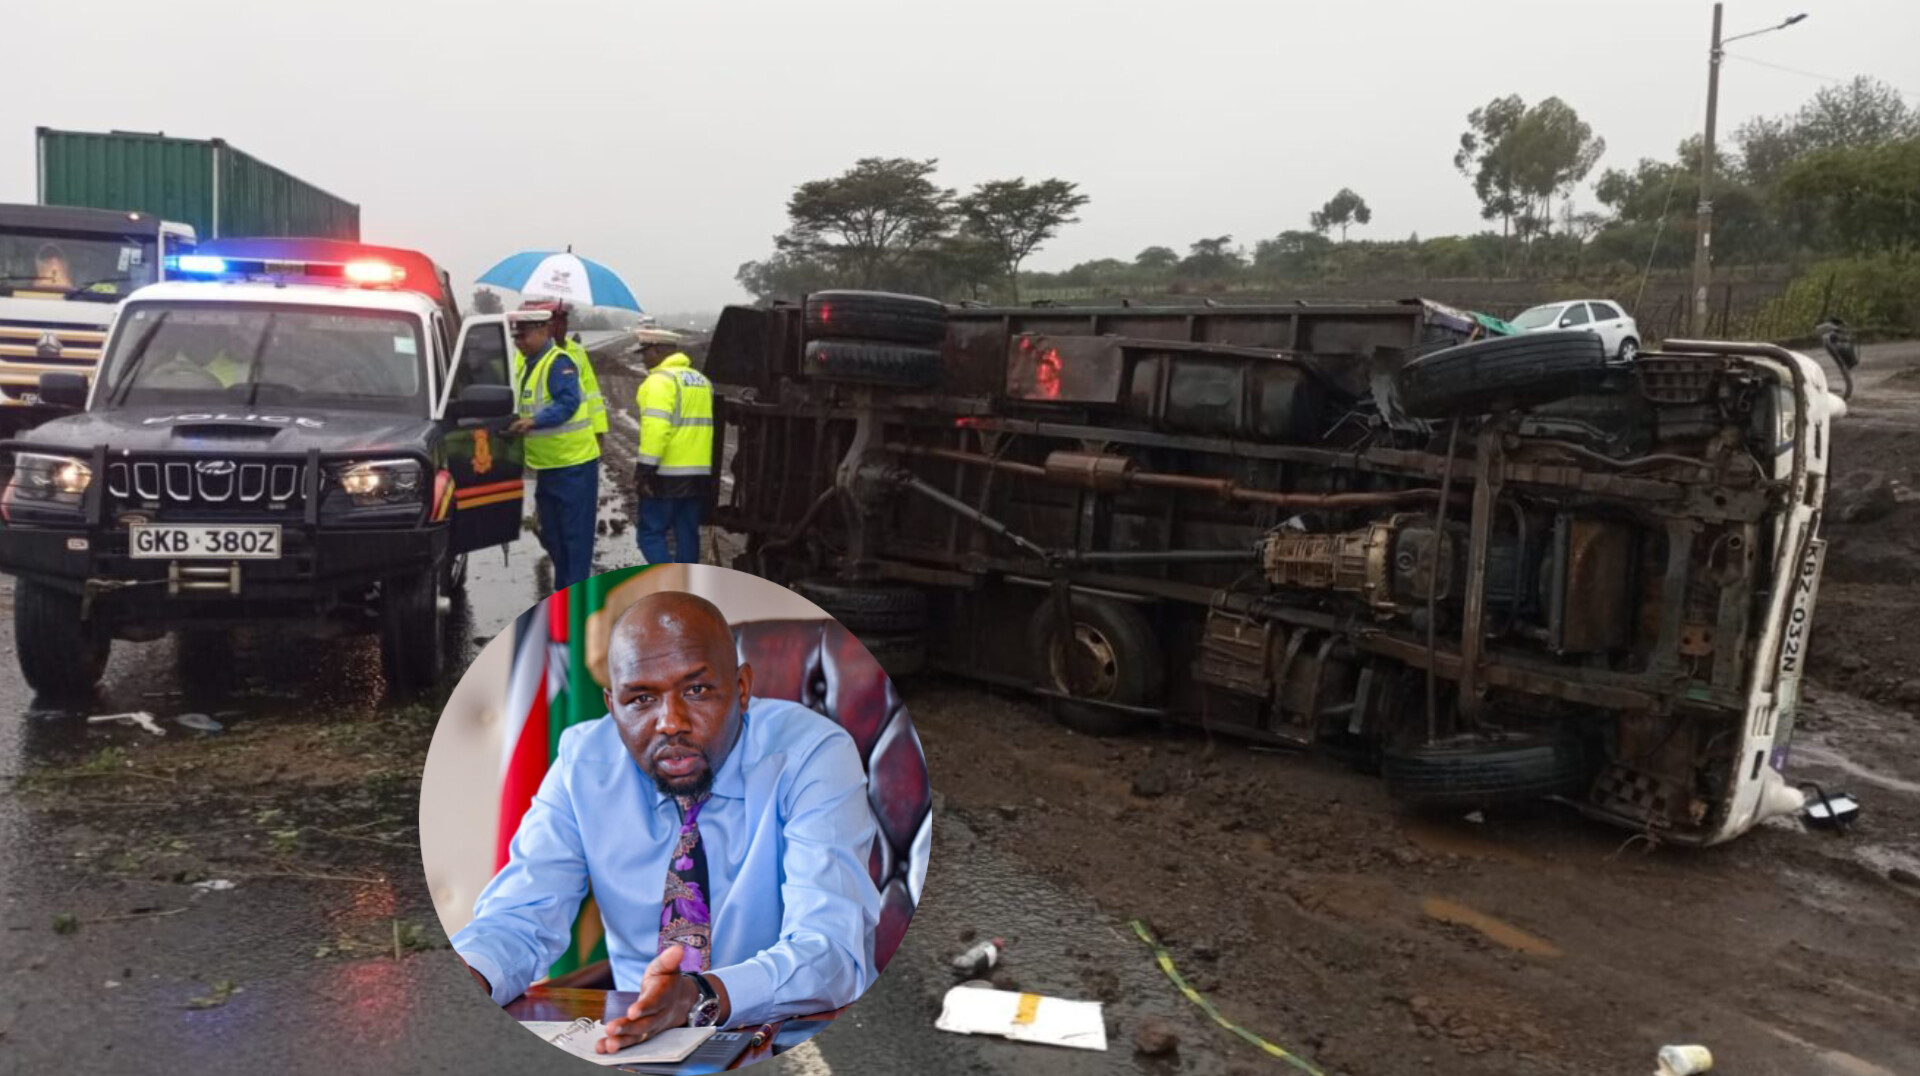 PRESIDENT RUTO TO LAUNCH ROAD SAFETY PLAN